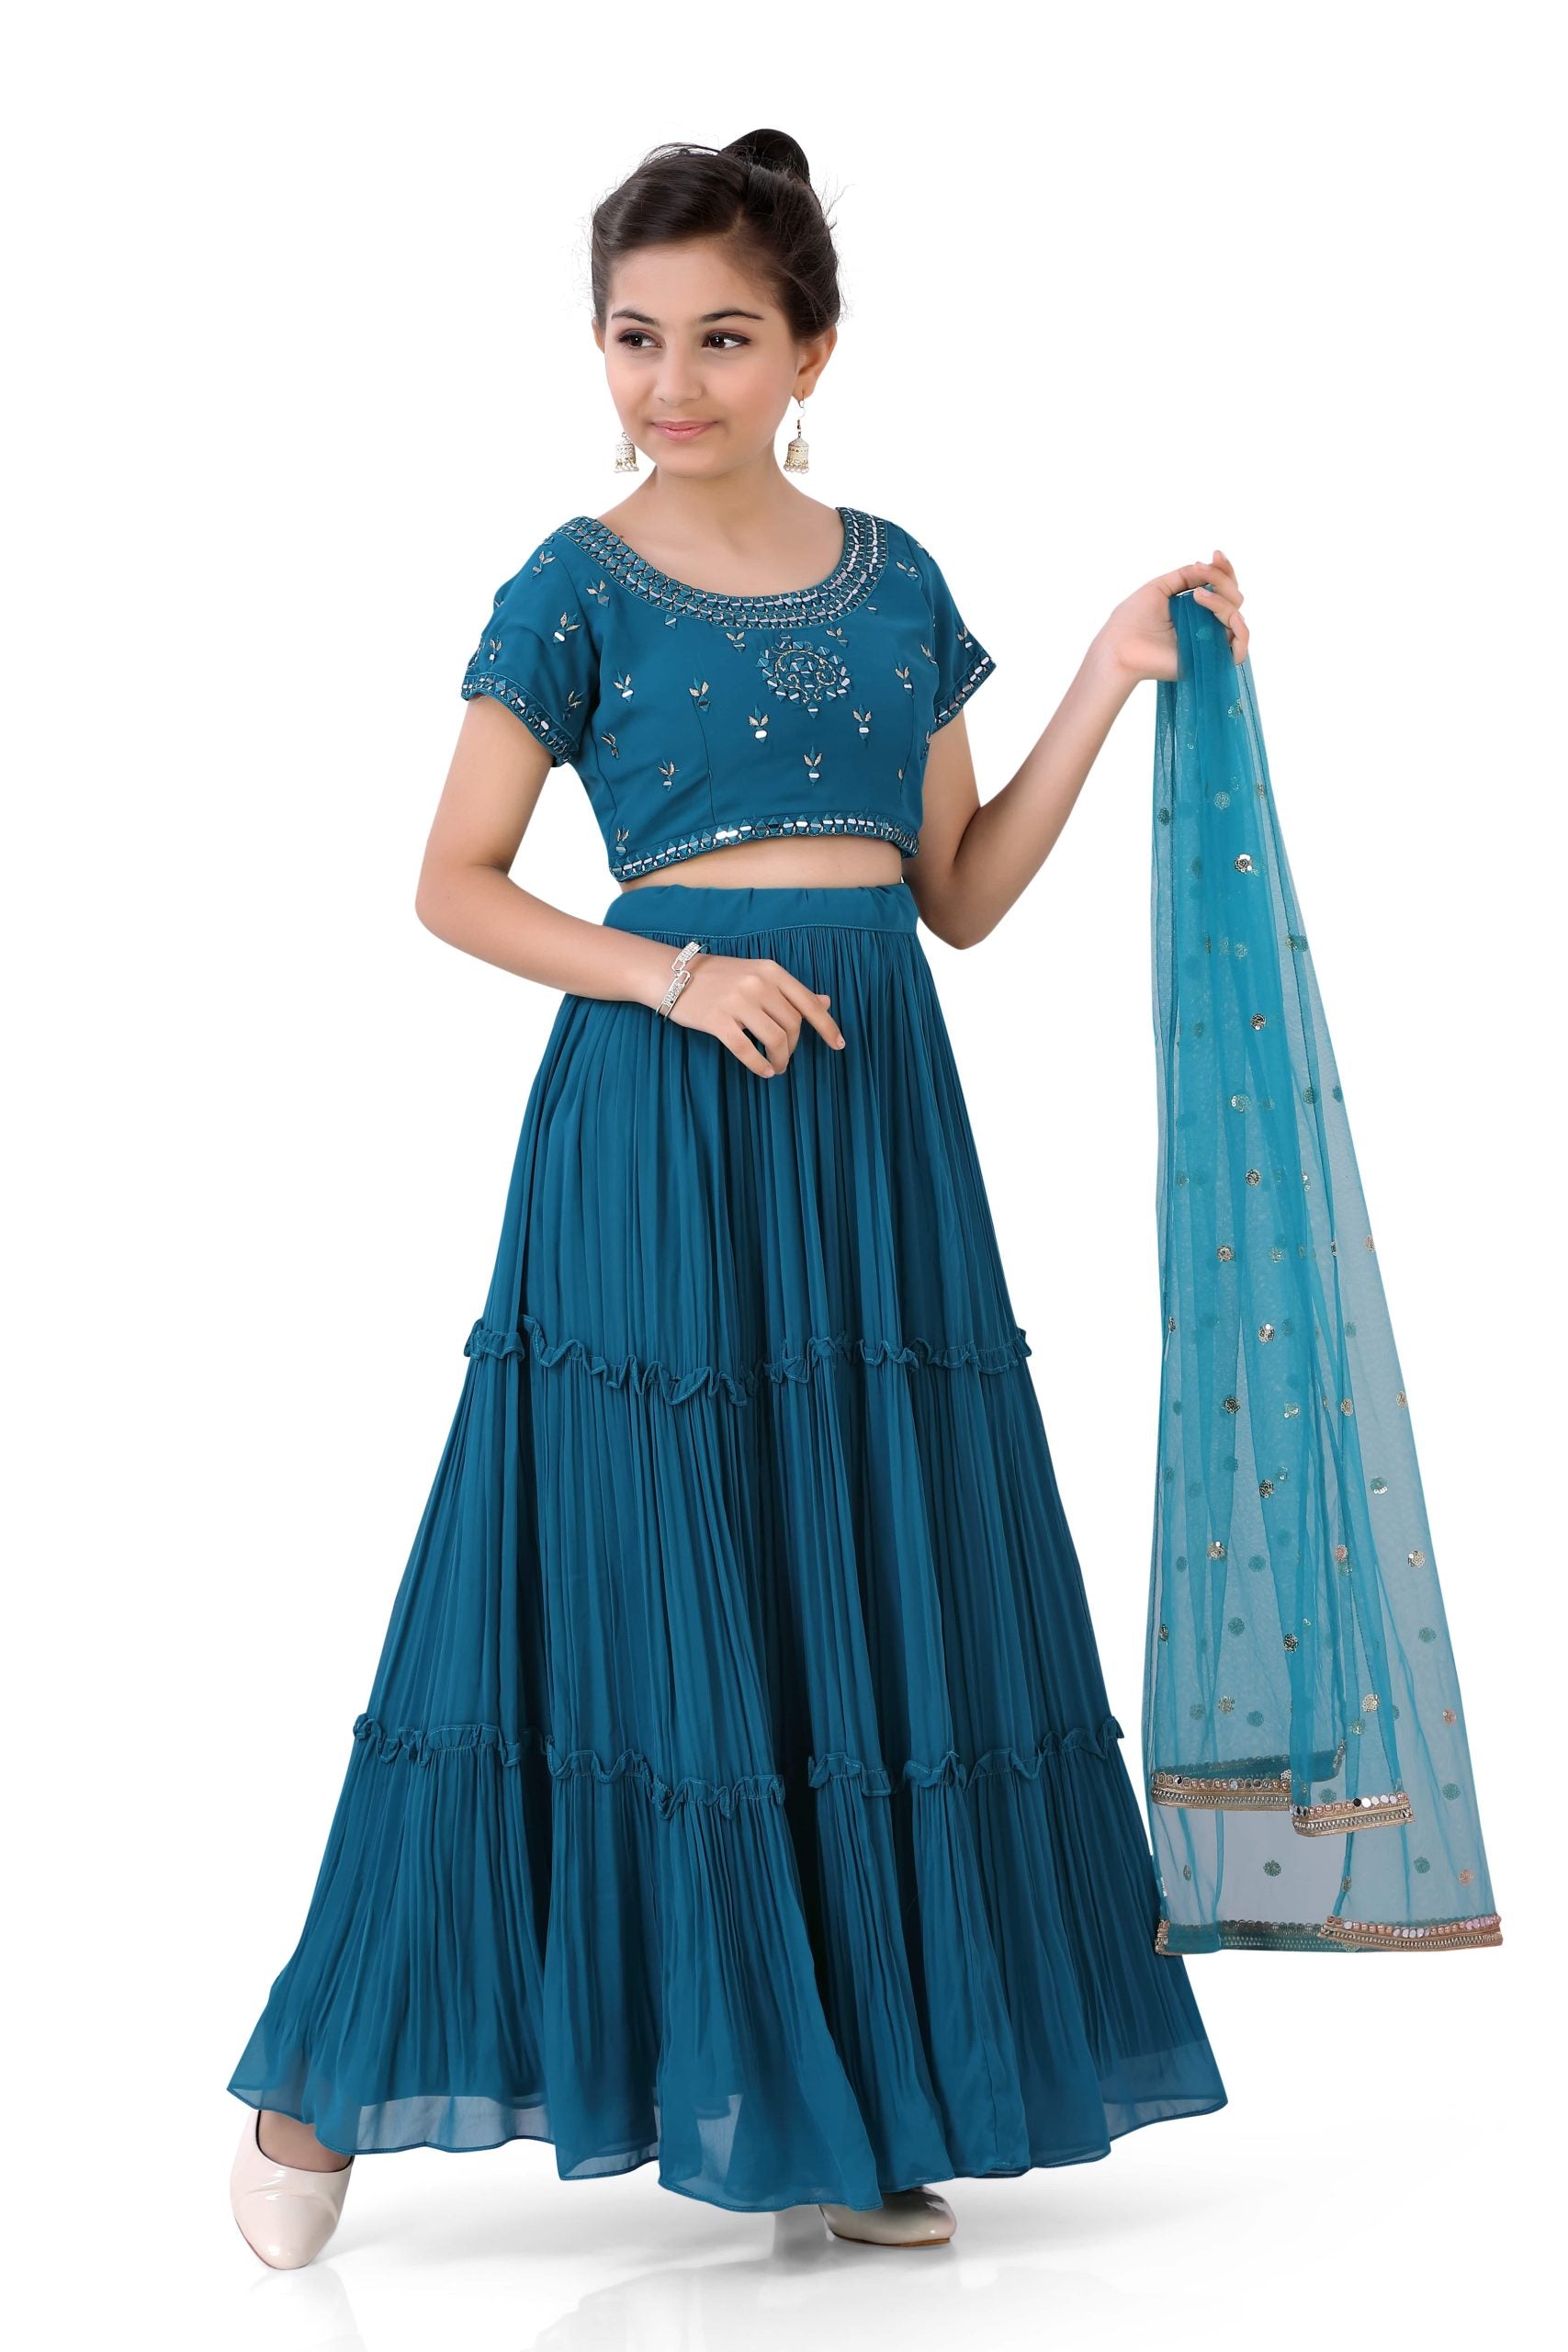 Girls Gazing Ghaghra Choli in Peacock Blue - Premium partywear ghaghra from Dulhan Exclusives - Just $99! Shop now at Dulhan Exclusives